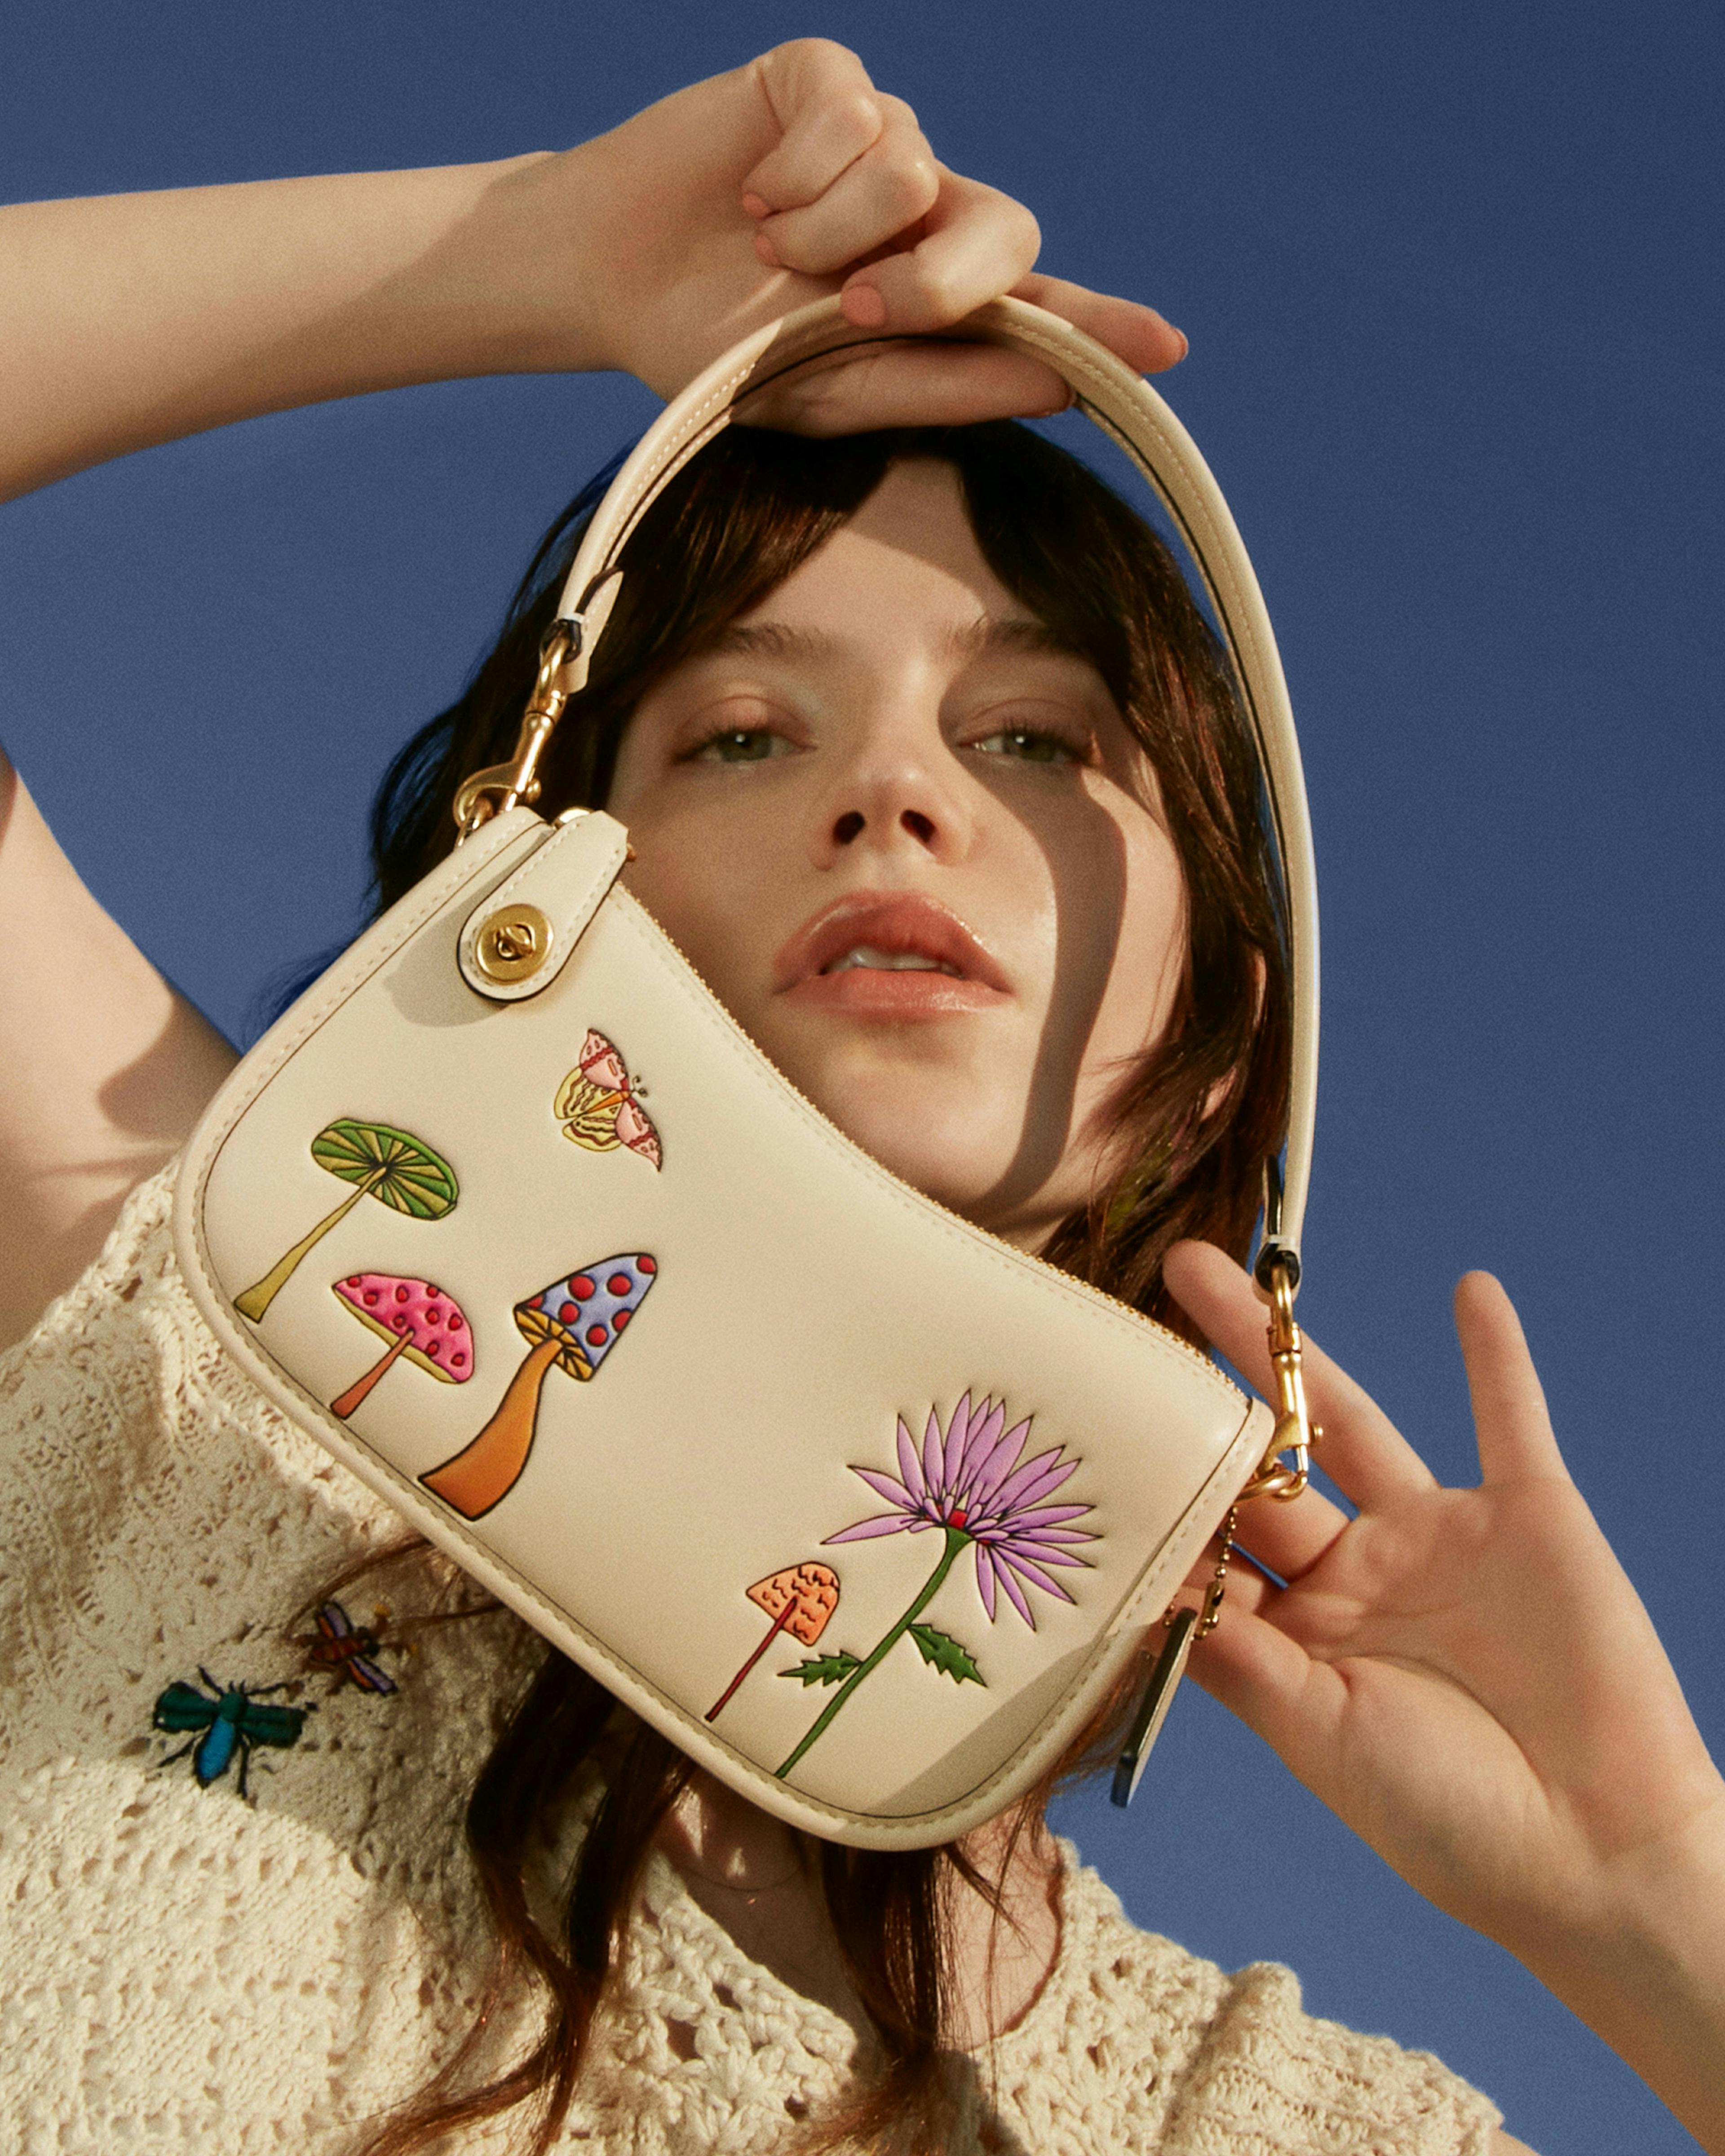 A model holding a bag from Coach observed by us collection with Kirsten dunst